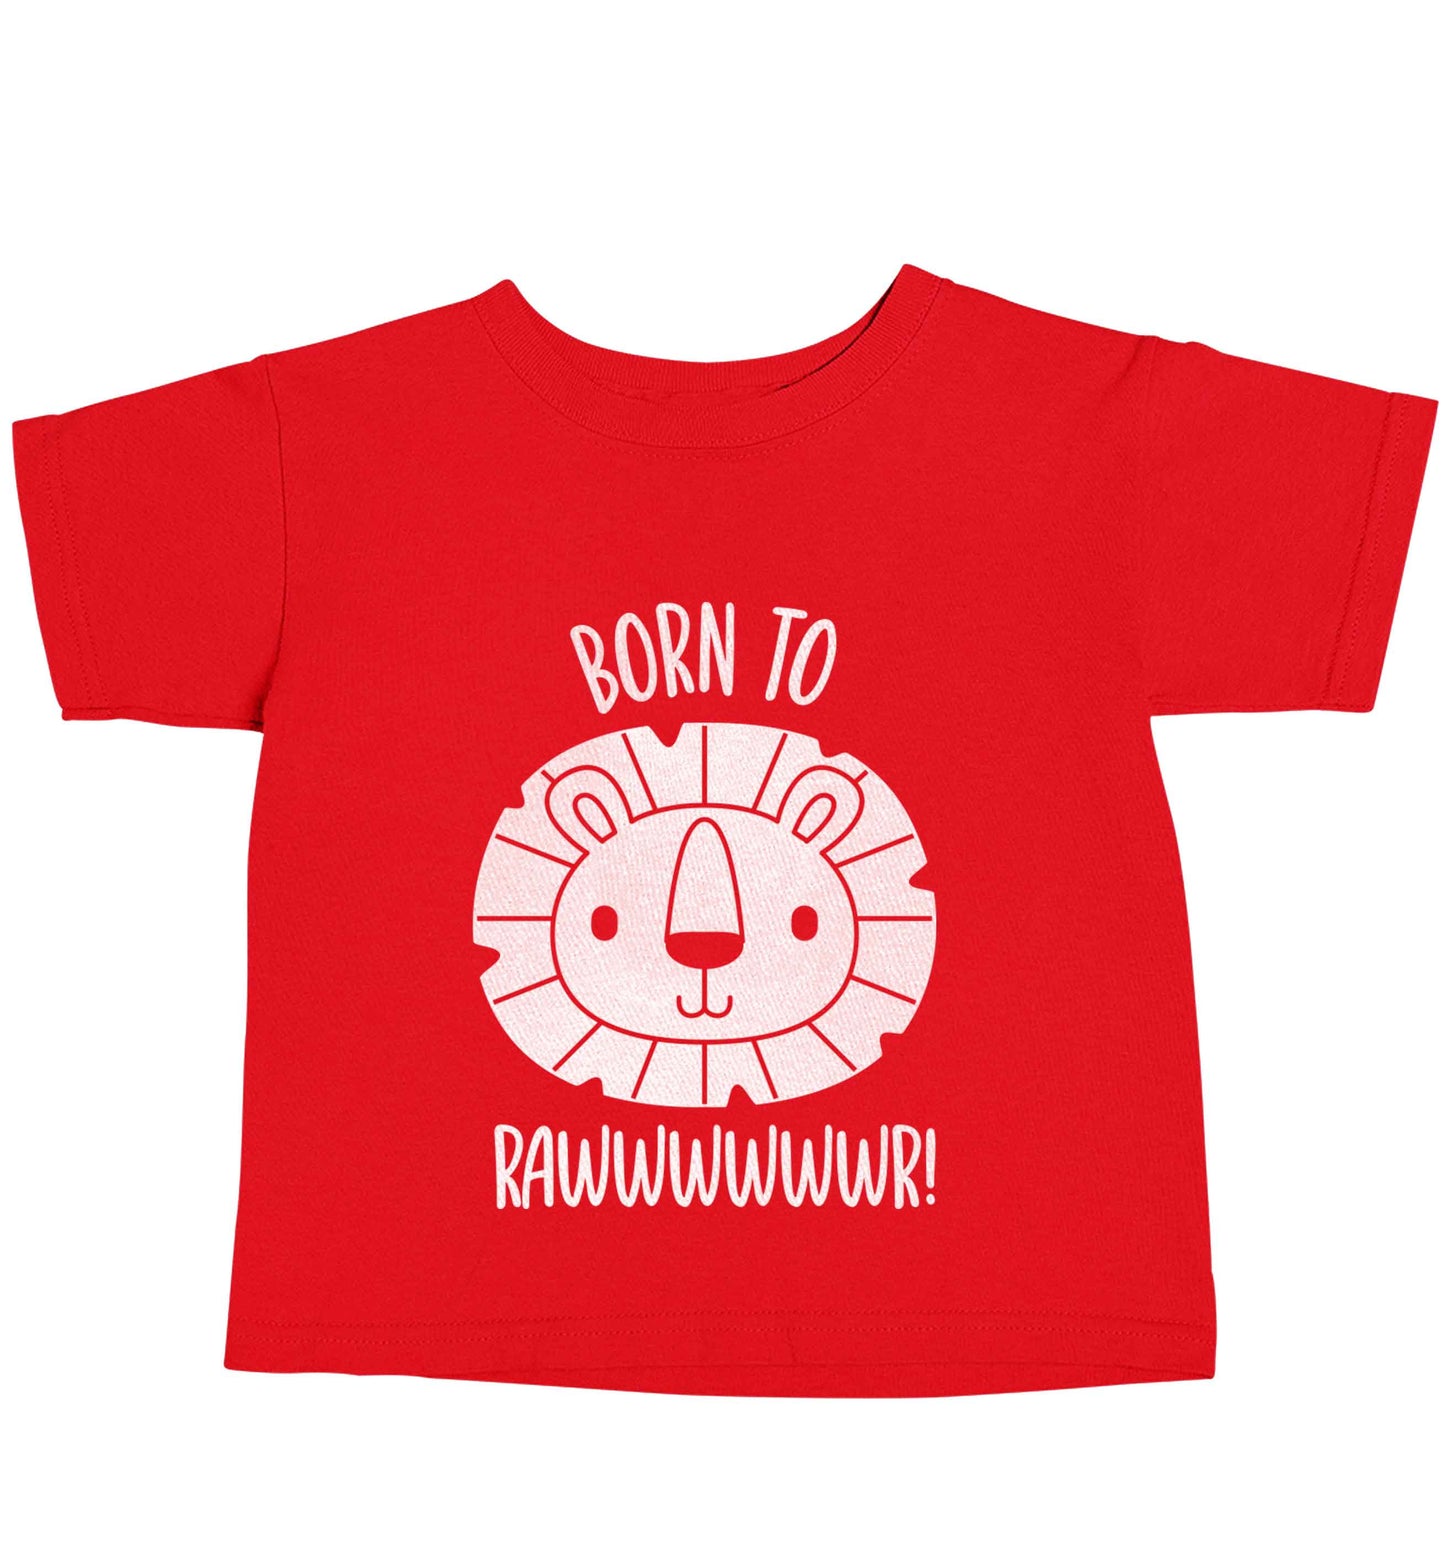 Born to rawr red baby toddler Tshirt 2 Years